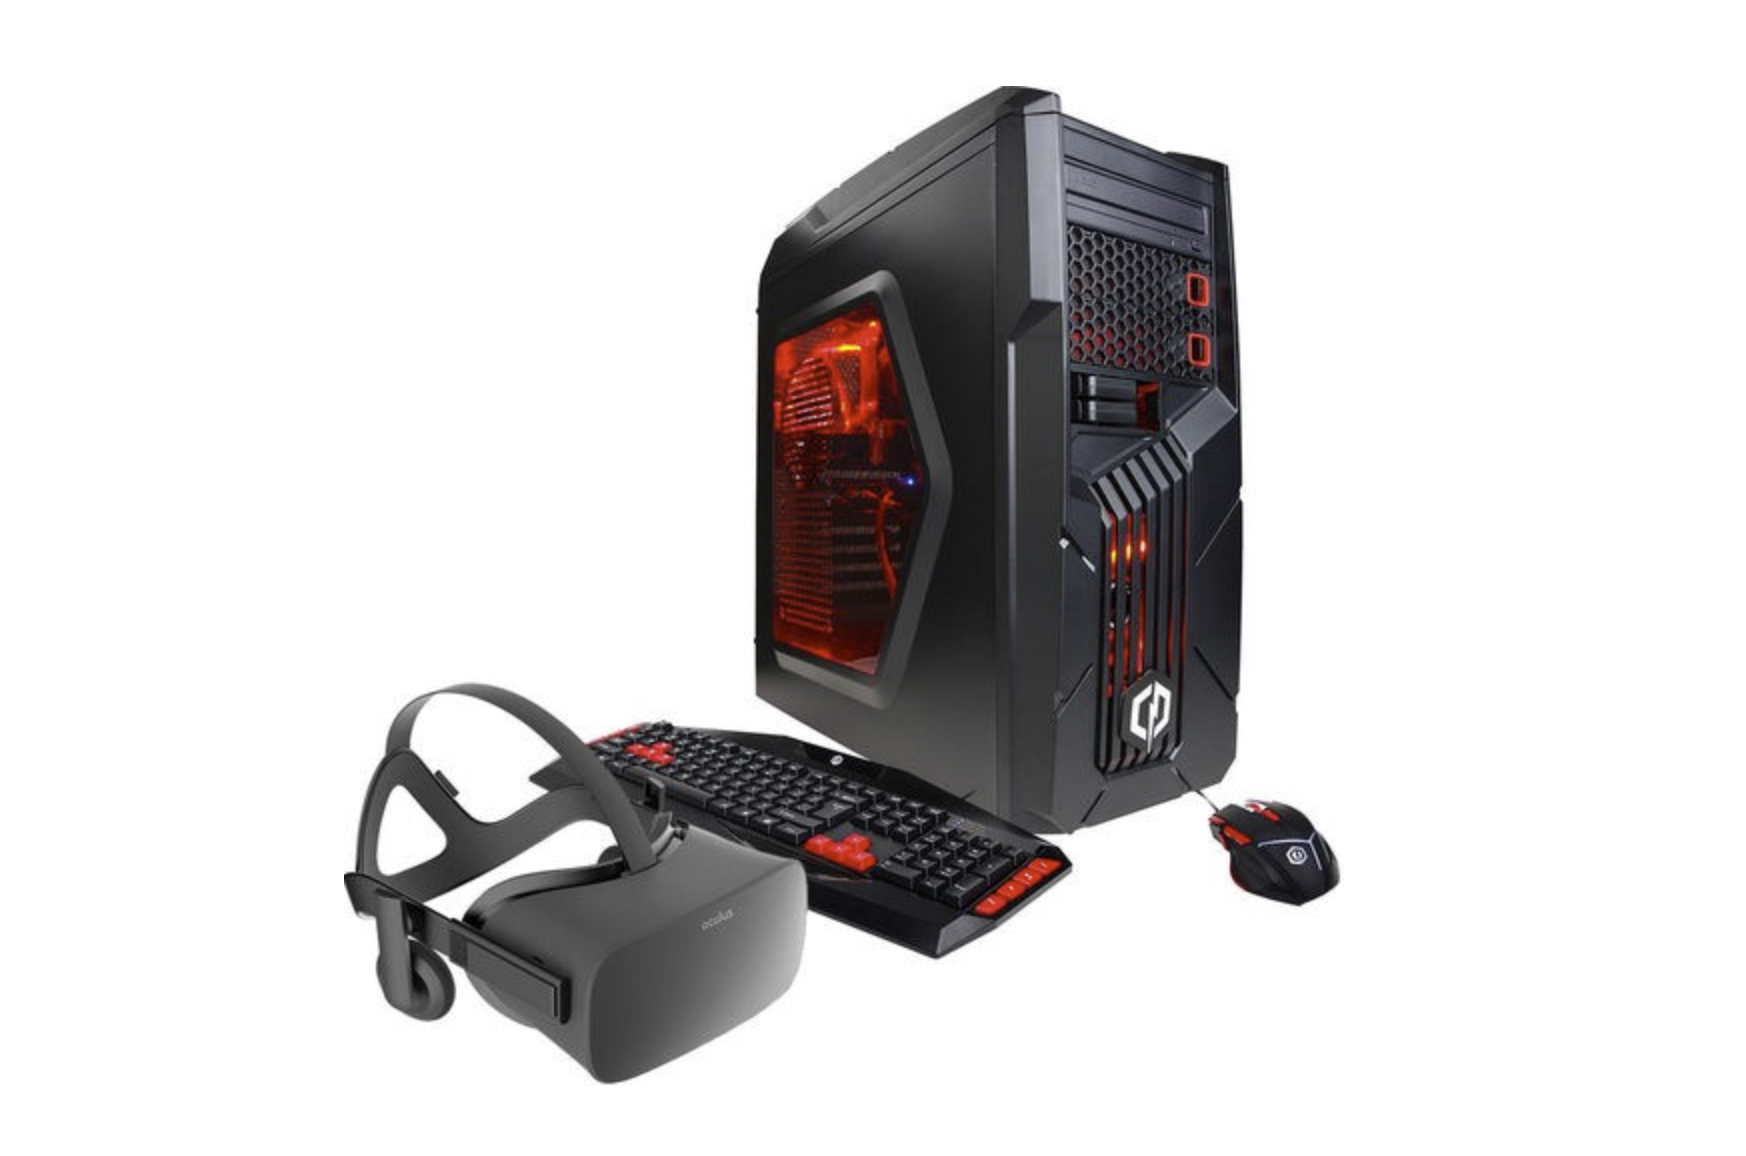 Tentacle min liberal CyberPowerPC intros VR-ready PC for $499, or $1,100 with Oculus Rift |  TechCrunch